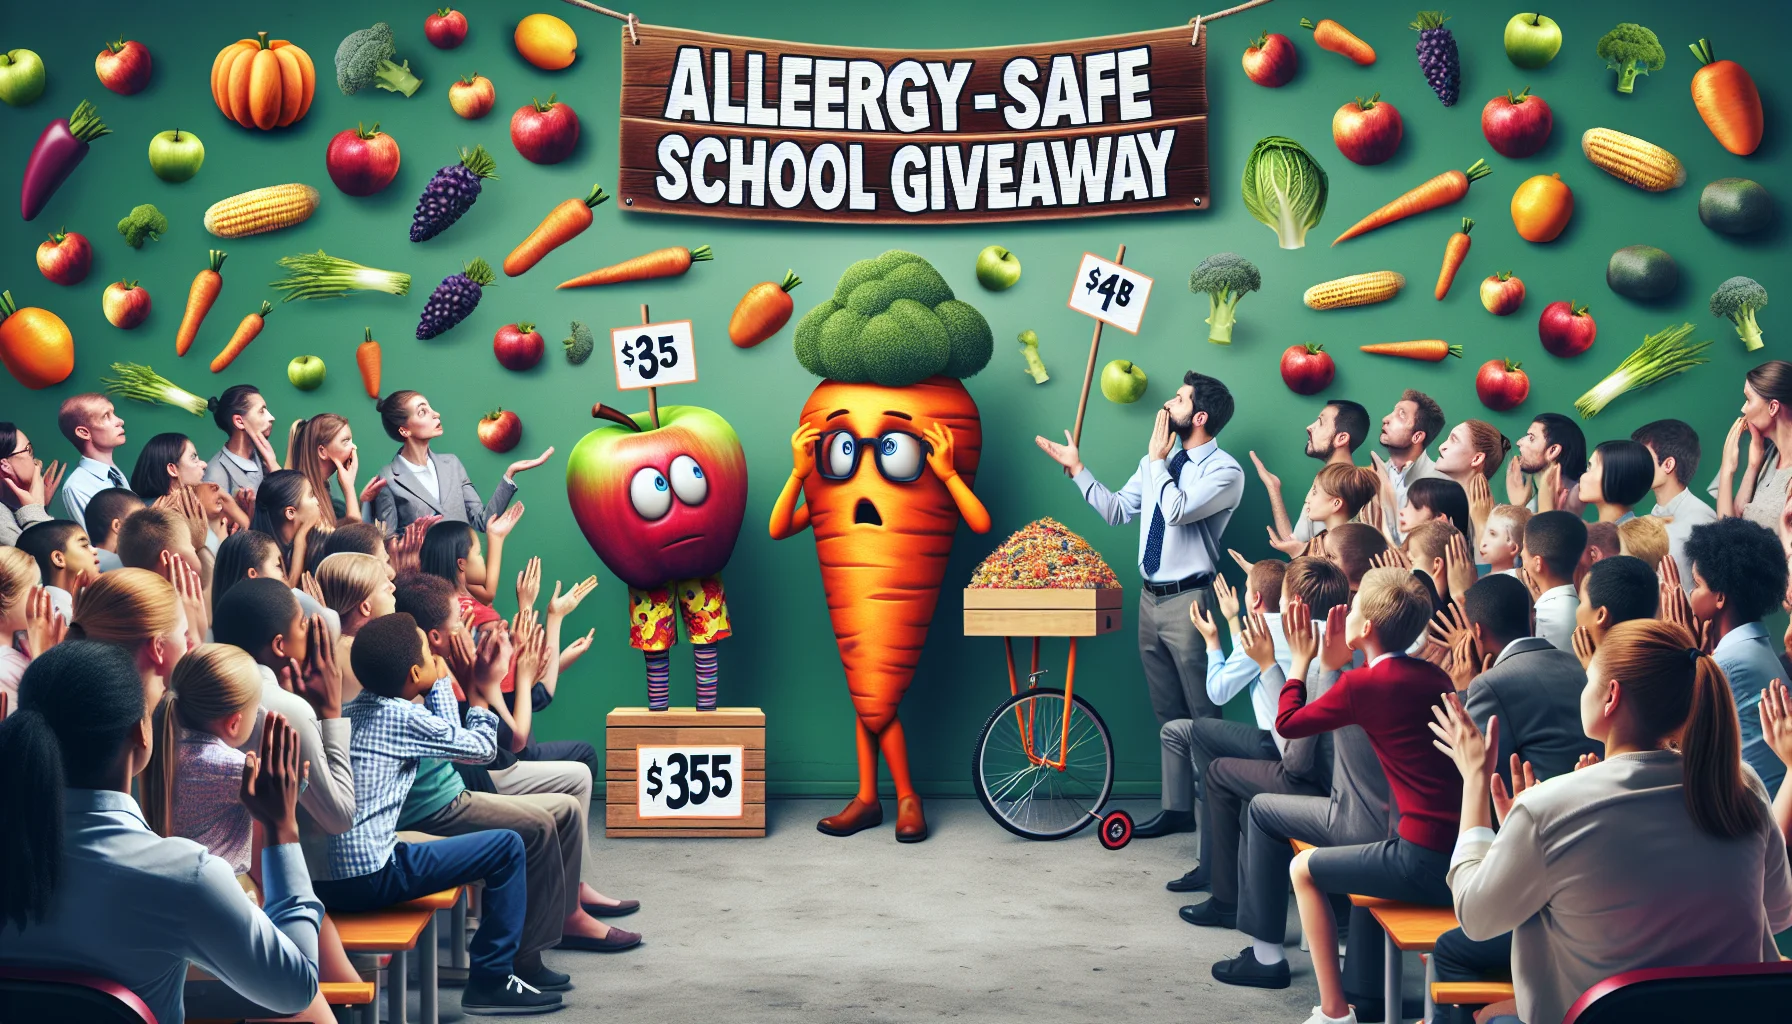 Create an artistic and humorous image of an Allergy-Safe School Giveaway. The main attraction should be a vibrant display of assorted fresh fruits and vegetables, with price tags clearly showing surprisingly low prices. The audience, a diverse group of people from all walks of life, express bewilderment at the affordability of such healthy food. Incorporate playful elements such as a giant carrot mascot handing out free samples and an apple on a unicycle, amusingly demonstrating the fun side of eating healthily. The atmosphere should exude joy and excitement around promoting healthier dietary choices.